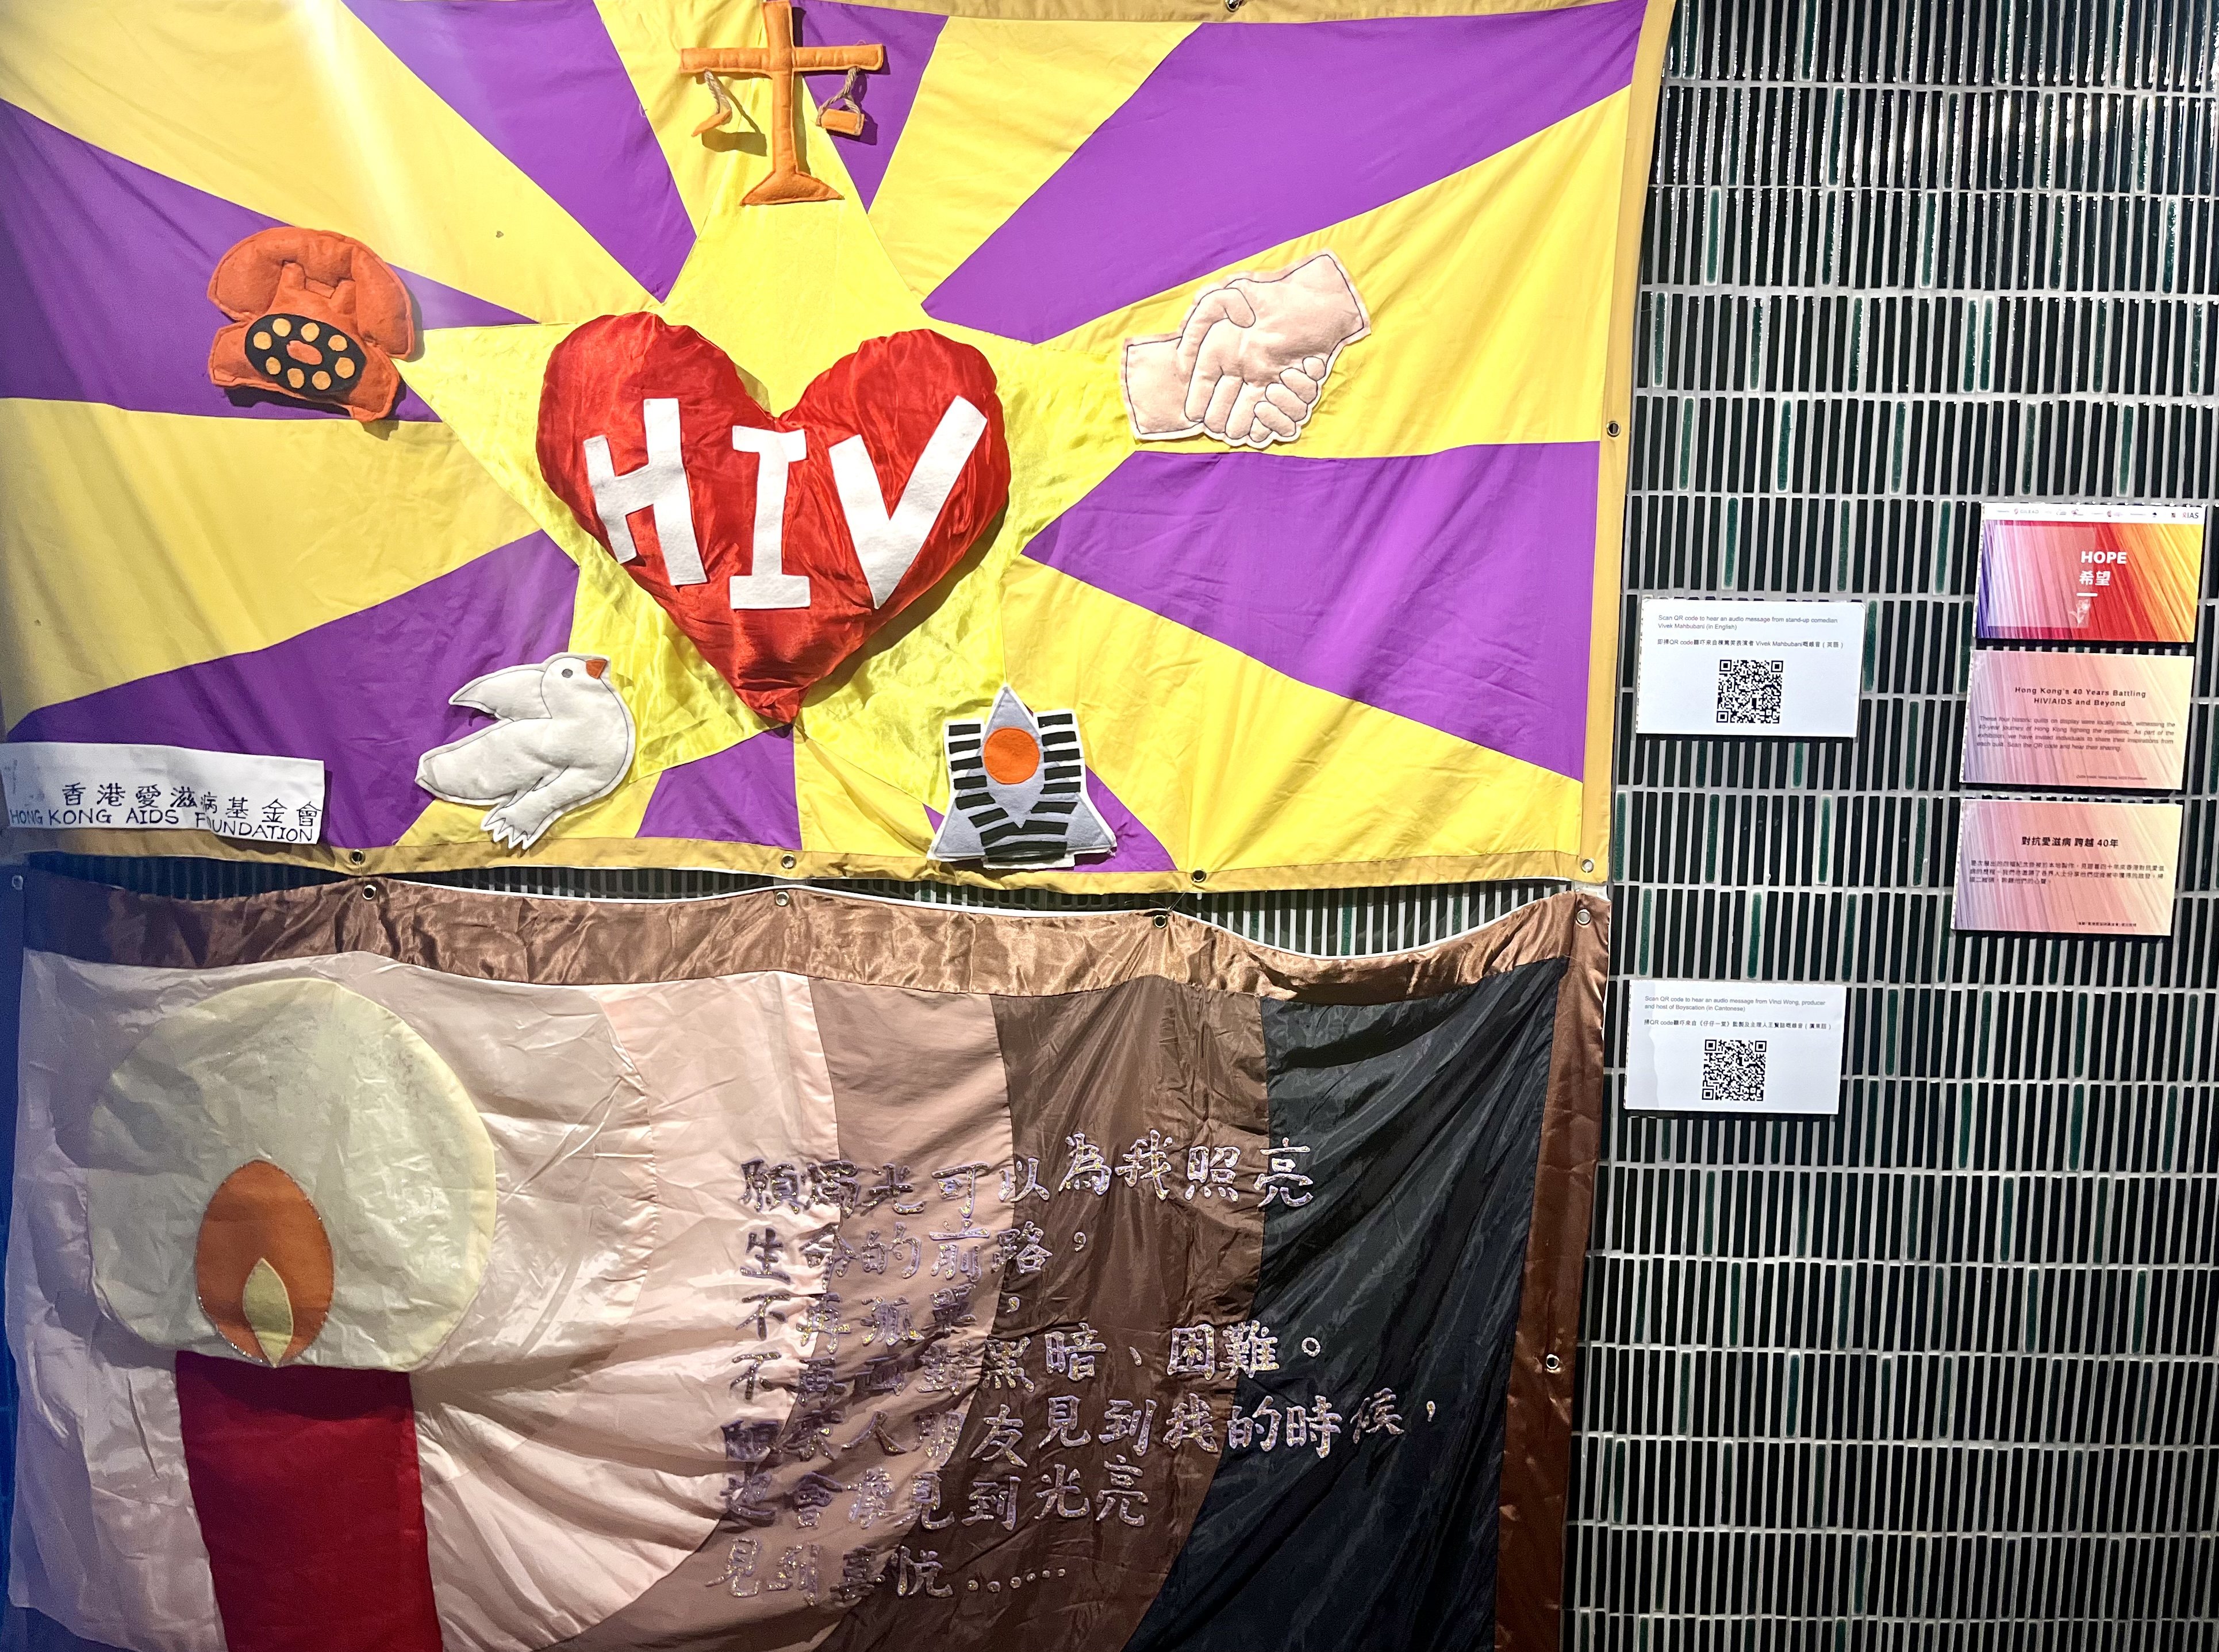 Quilts from the Aids exhibition at the Eaton HK. Photo: Kylie Knott